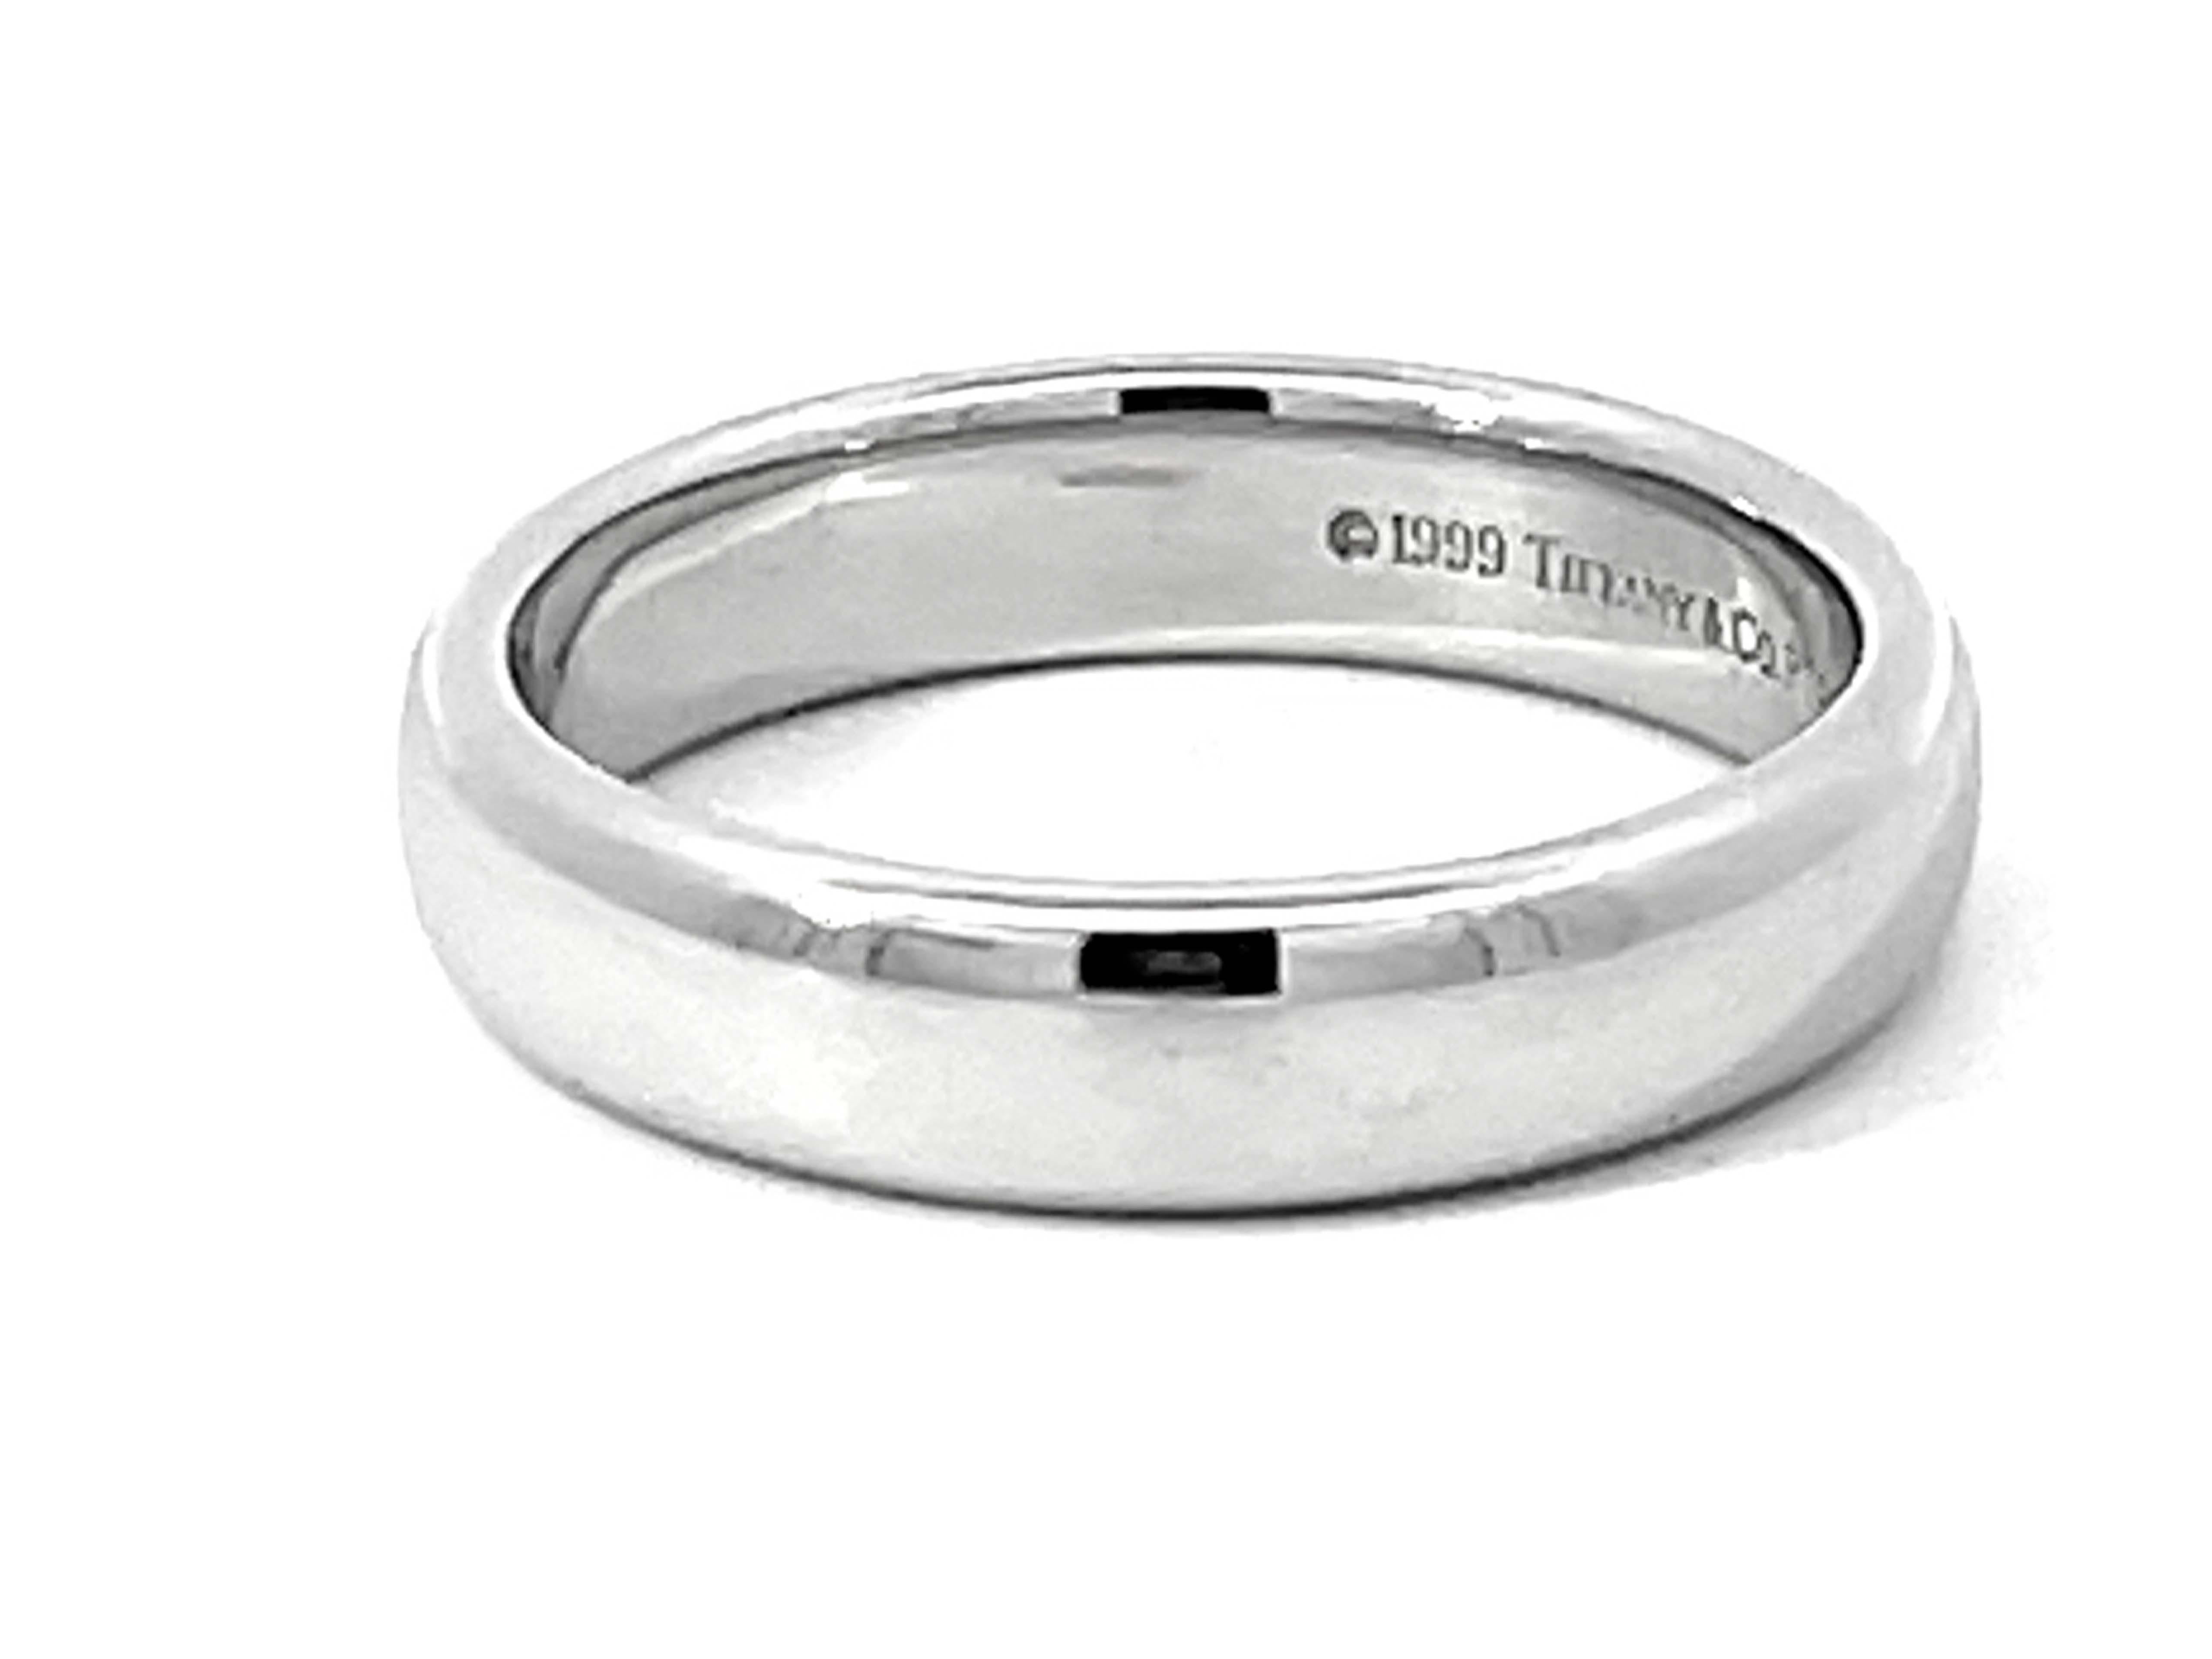 1999 Tiffany & Co. Forever Wedding Band Ring Platinum 4.5 mm Wide For Sale 1